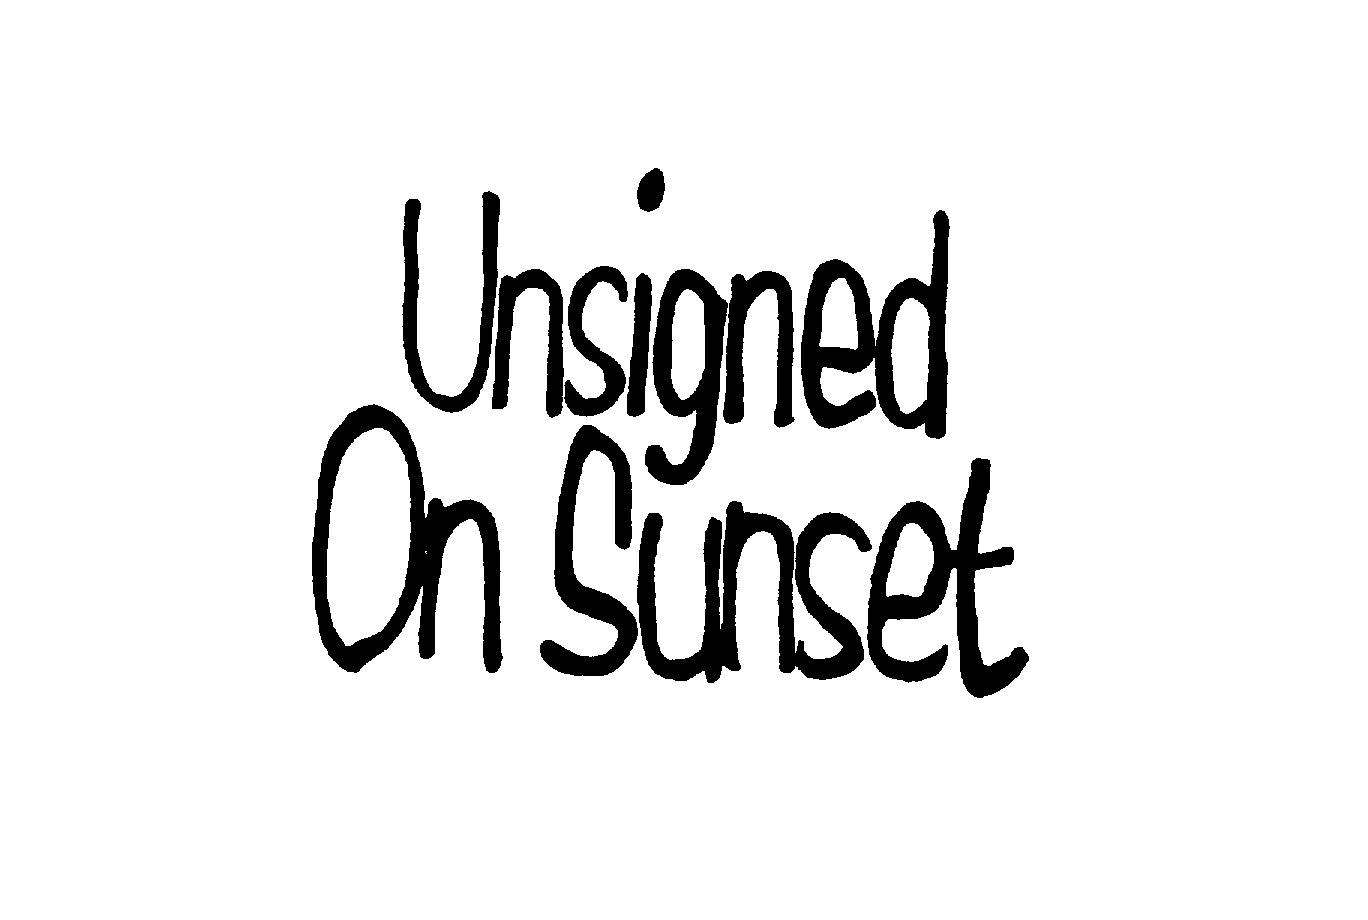 UNSIGNED ON SUNSET